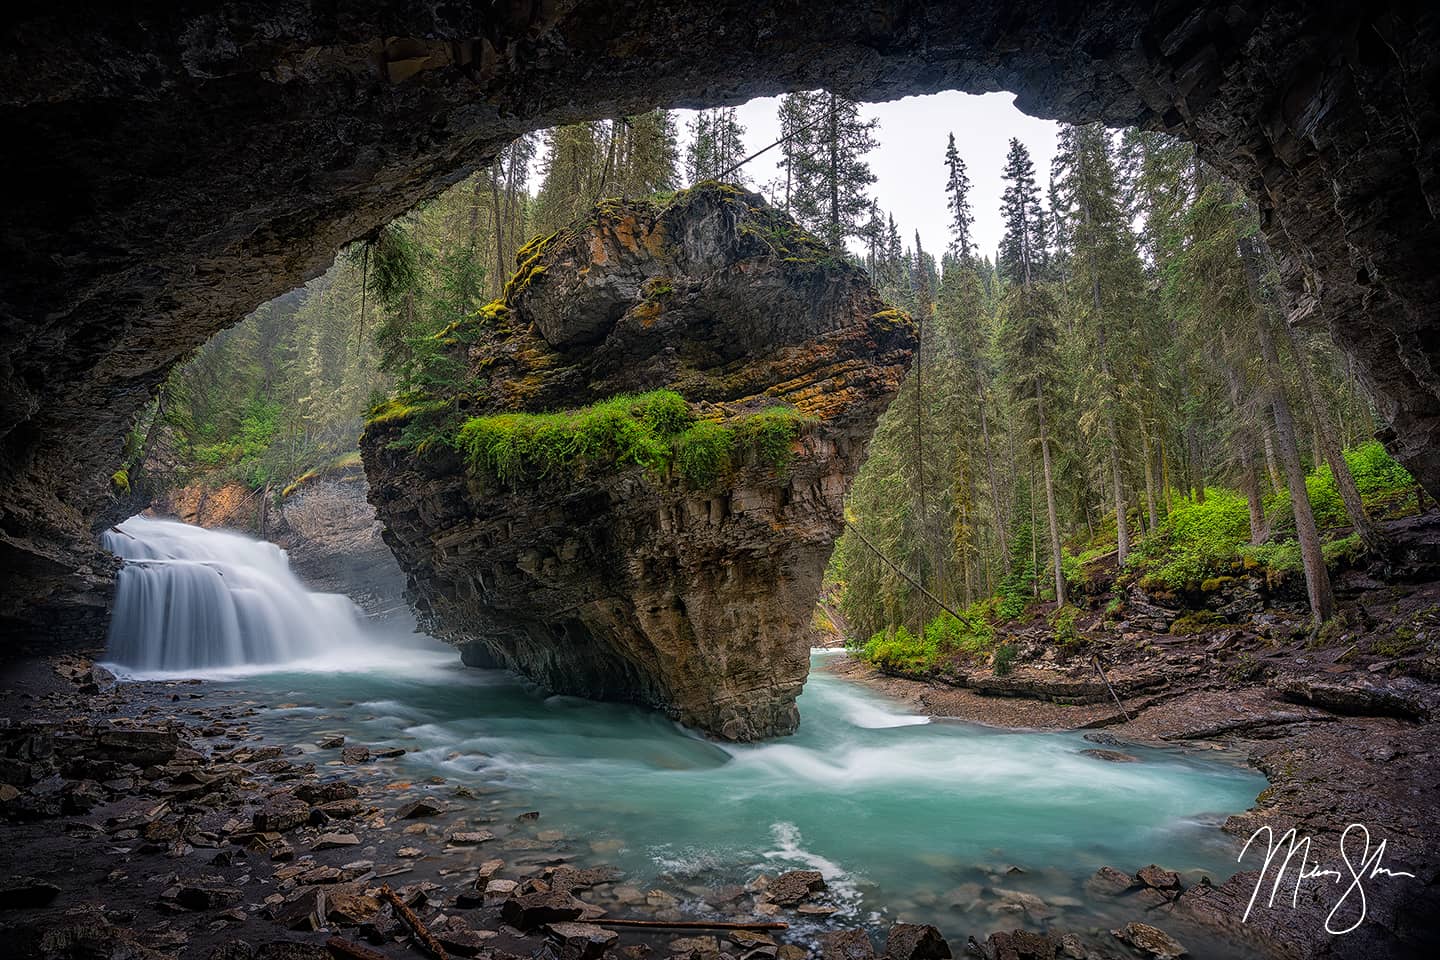 Limited Edition Fine Art Prints of the Secret Cave in Johnston Canyon, Banff National Park, Canada